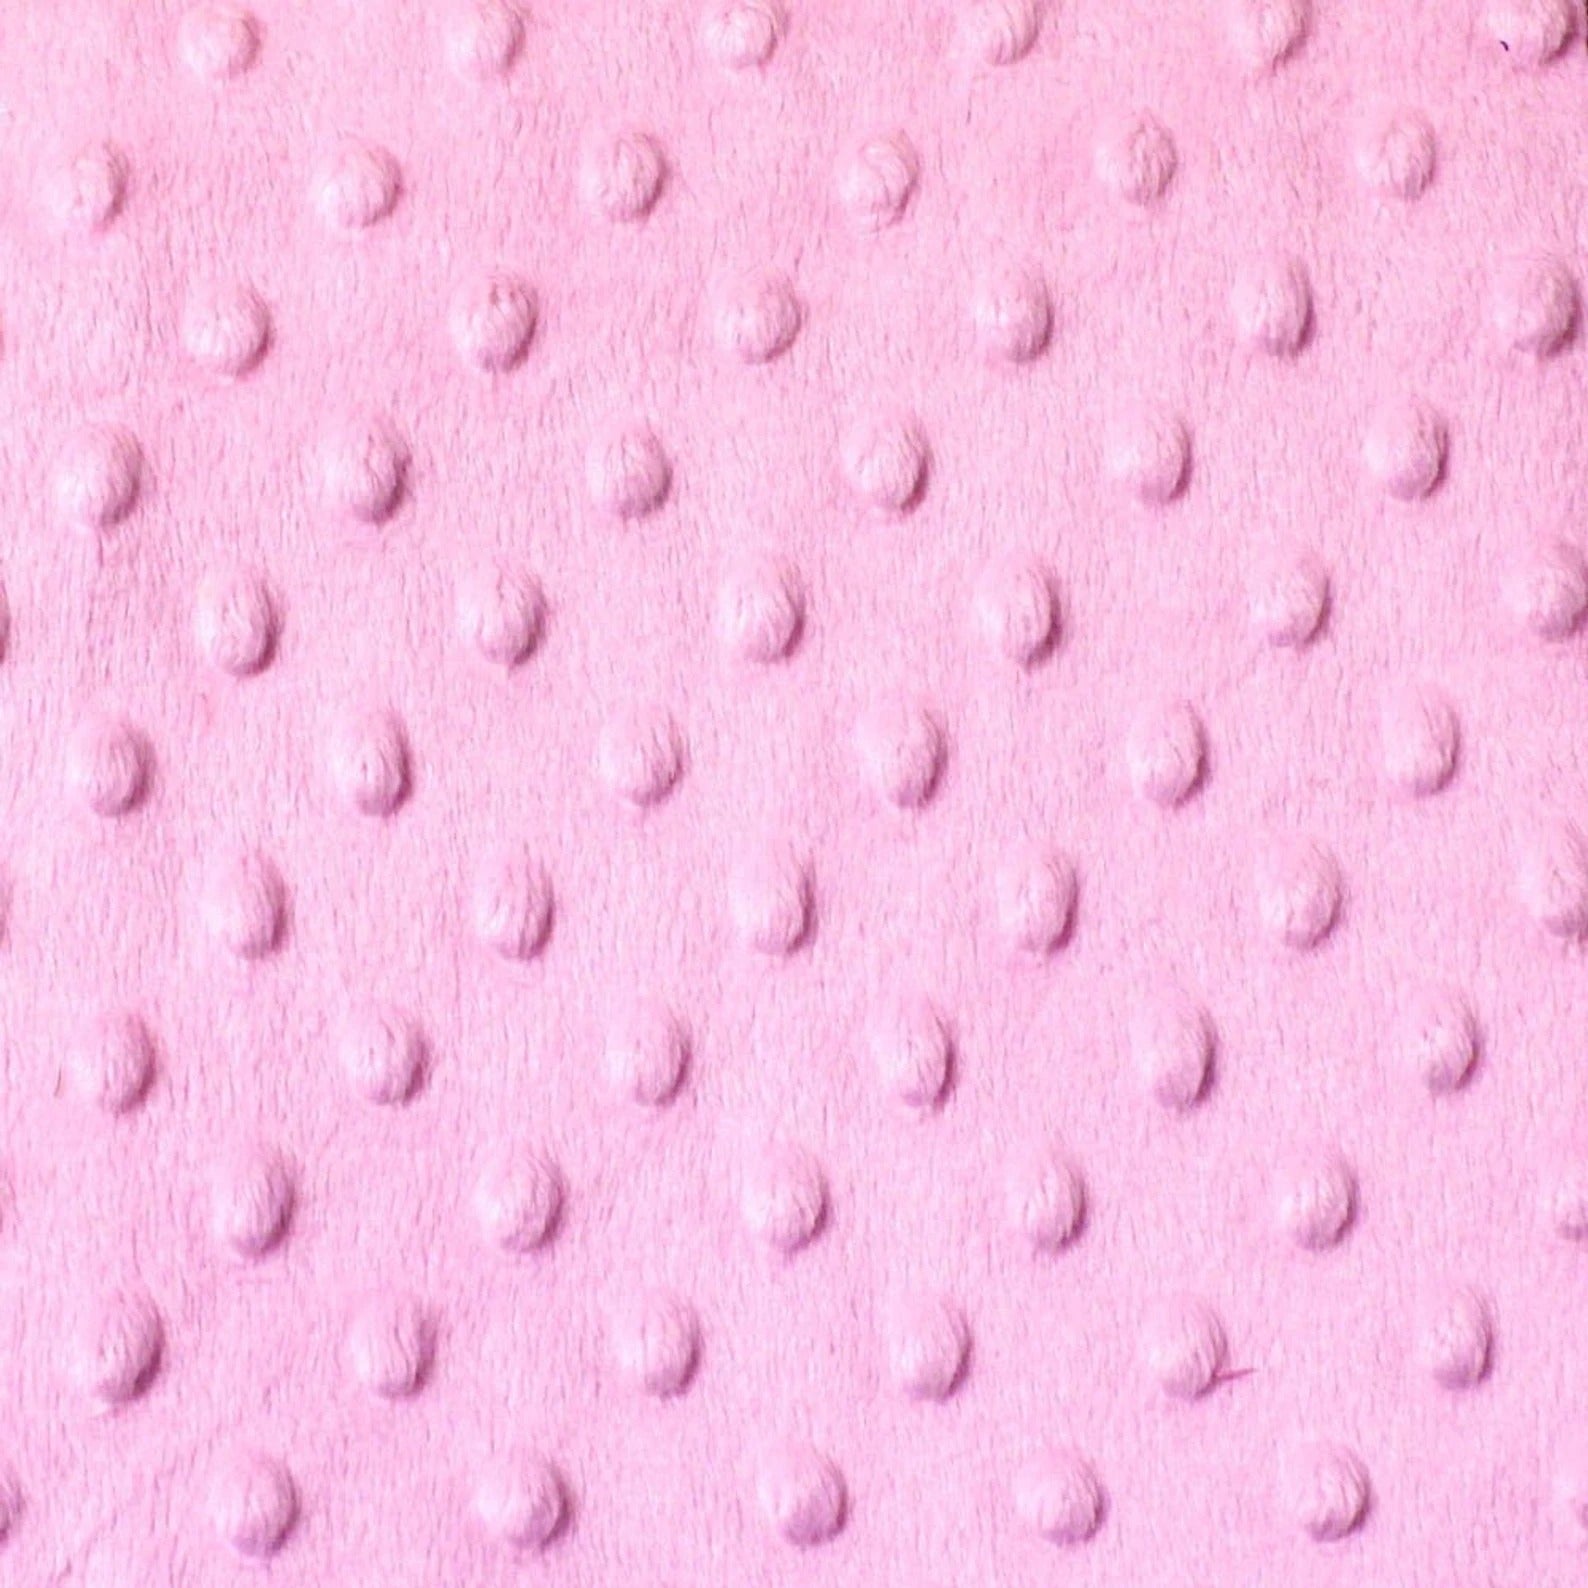 Dimple Dot Minky Fabric Sold By The Yard - 36"/ 58"MinkyICEFABRICICE FABRICSLight PinkBy The Yard (60 inches Wide)Dimple Dot Minky Fabric Sold By The Yard - 36"/ 58" ICEFABRIC Light Pink